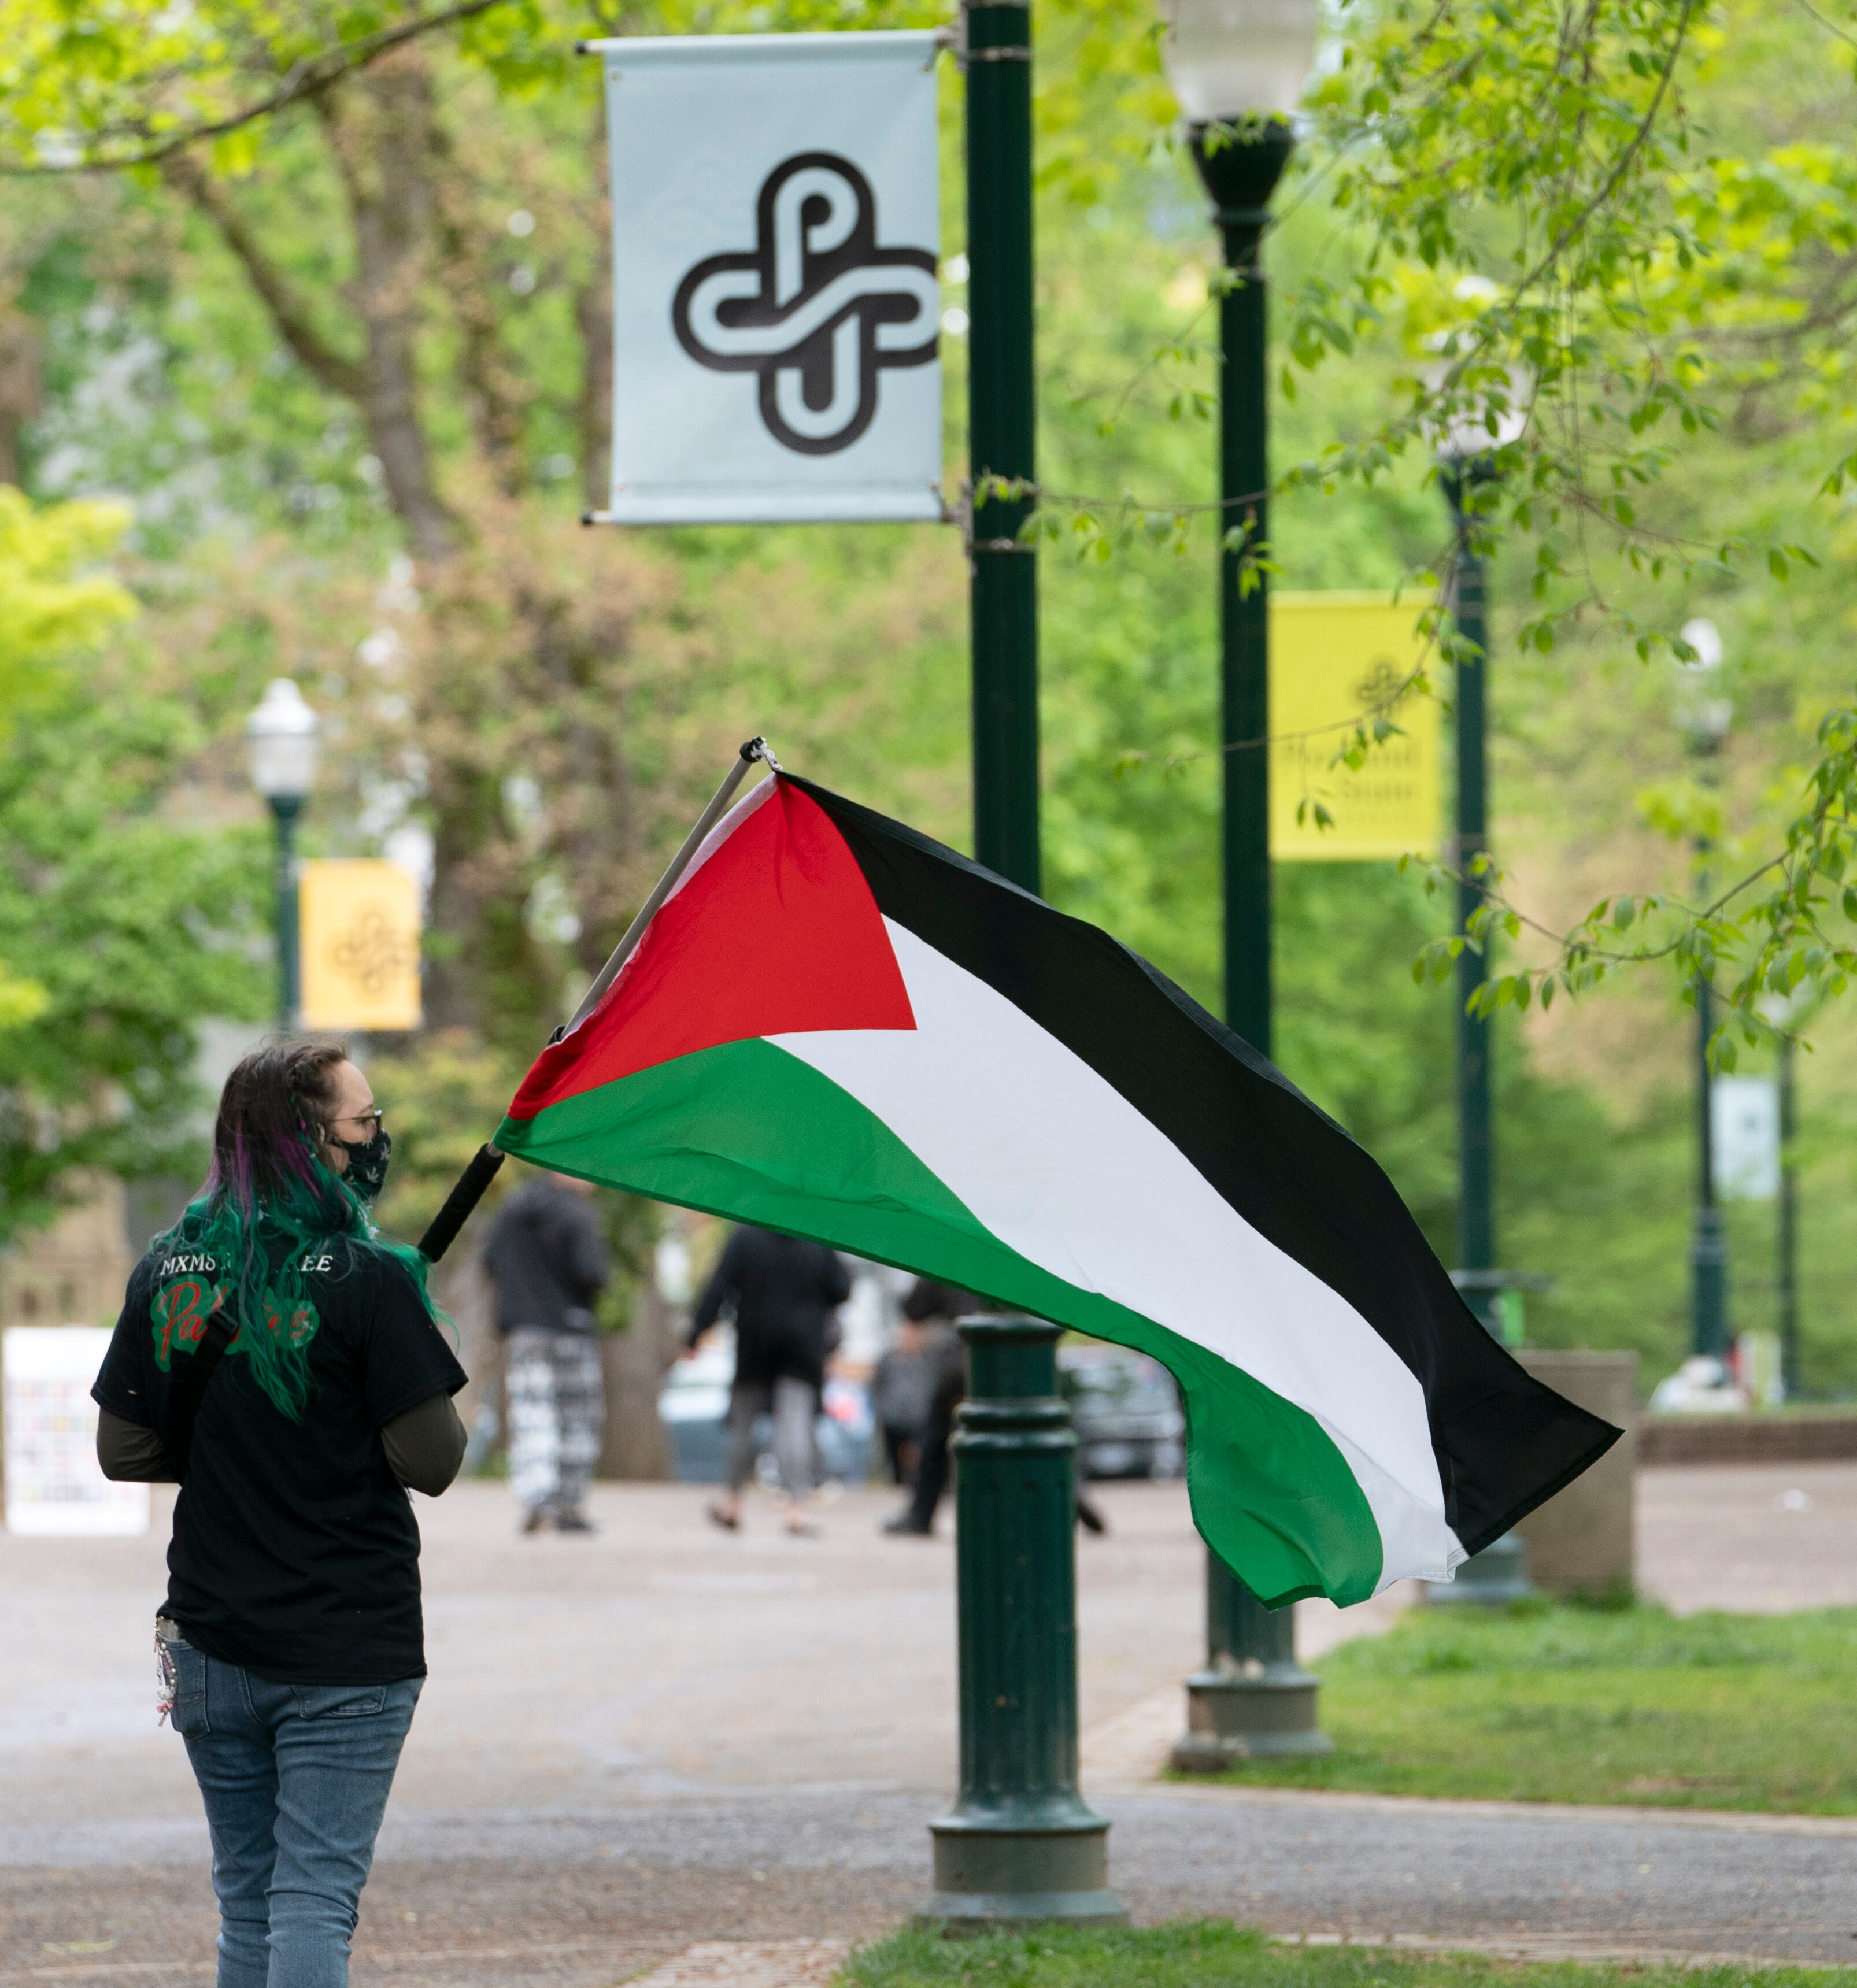 A protester carries a flag in Portland State Univeristy’s South Park Blocks, April 26, 2024. Protesters in support of Palestinians in Gaza and in protest of Portland State University’s ties with companies that have contracts with Israel, set up tents and barricades on Thursday and were removed by police after several hours. Police warned in a statement Friday morning that anybody occupying a closed park, engaging in violent activity, or destroying property could be arrested.